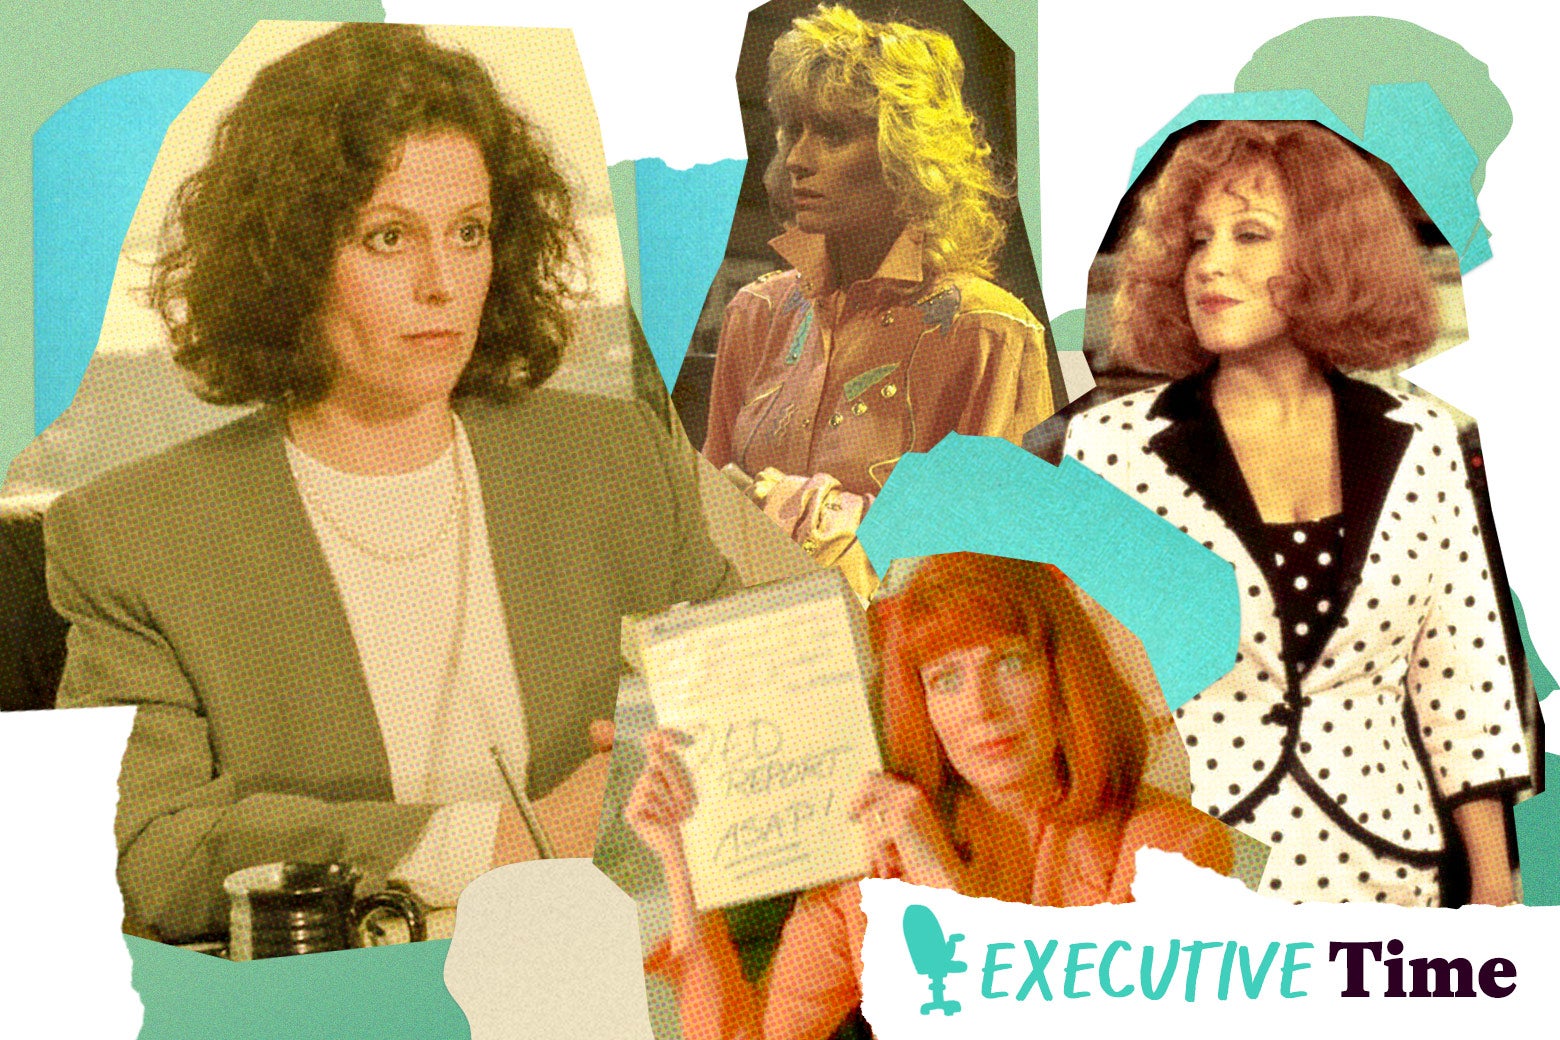 Female characters in Who’s the Boss, Working Girl, Don‘t Tell Mom the Babysitter’s Dead, and Big Business.